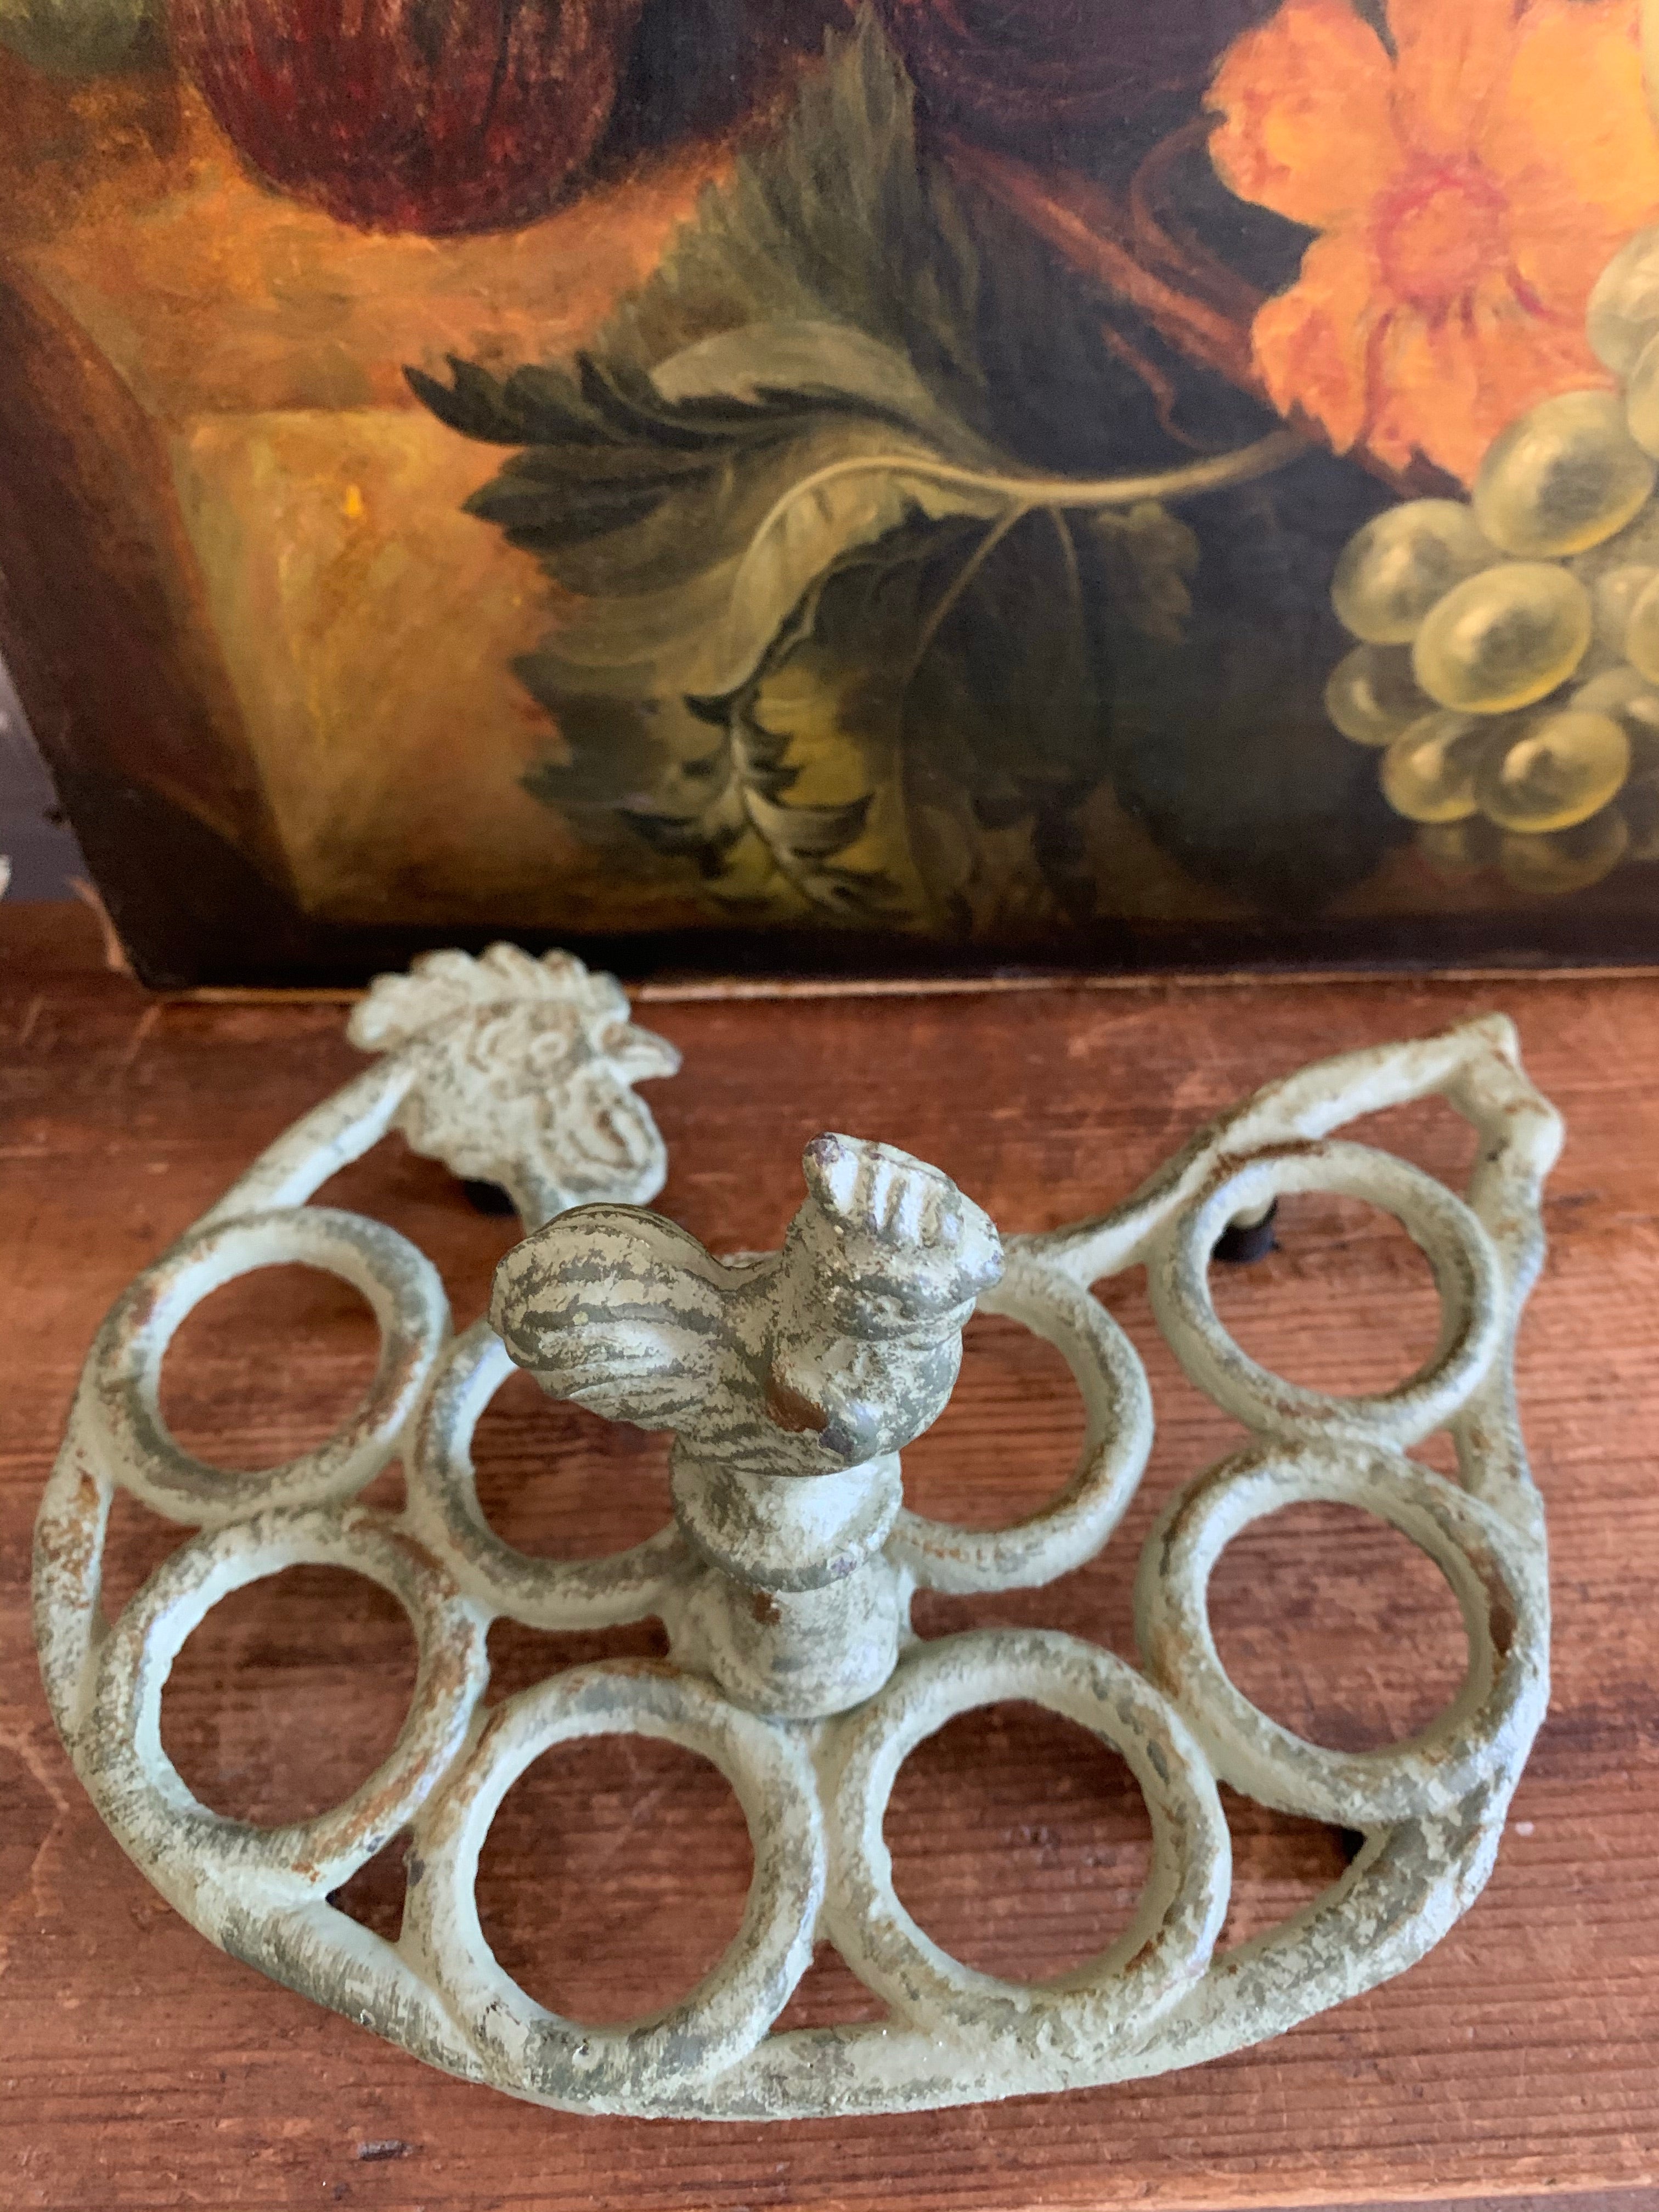 French Vintage Cast Iron "Hen" Egg Stand